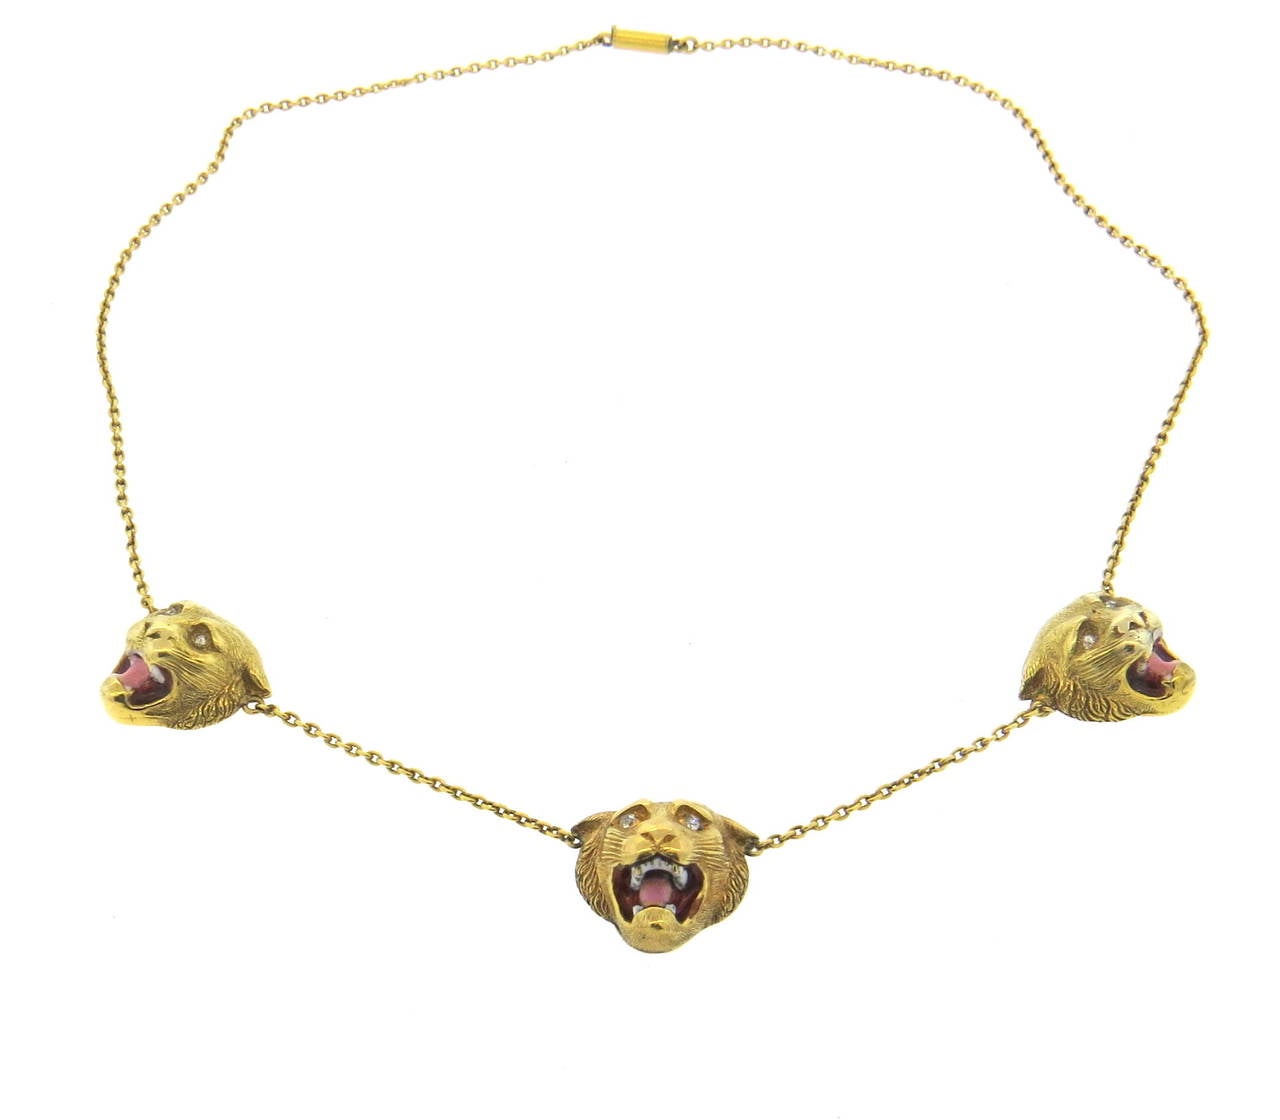 Beautiful antique 18k gold necklace, featuring three lion head stations, each decorate with Old Mine cut diamond eyes, and a combination of red, pink and white enamel mouths. Necklace is 18 1/4